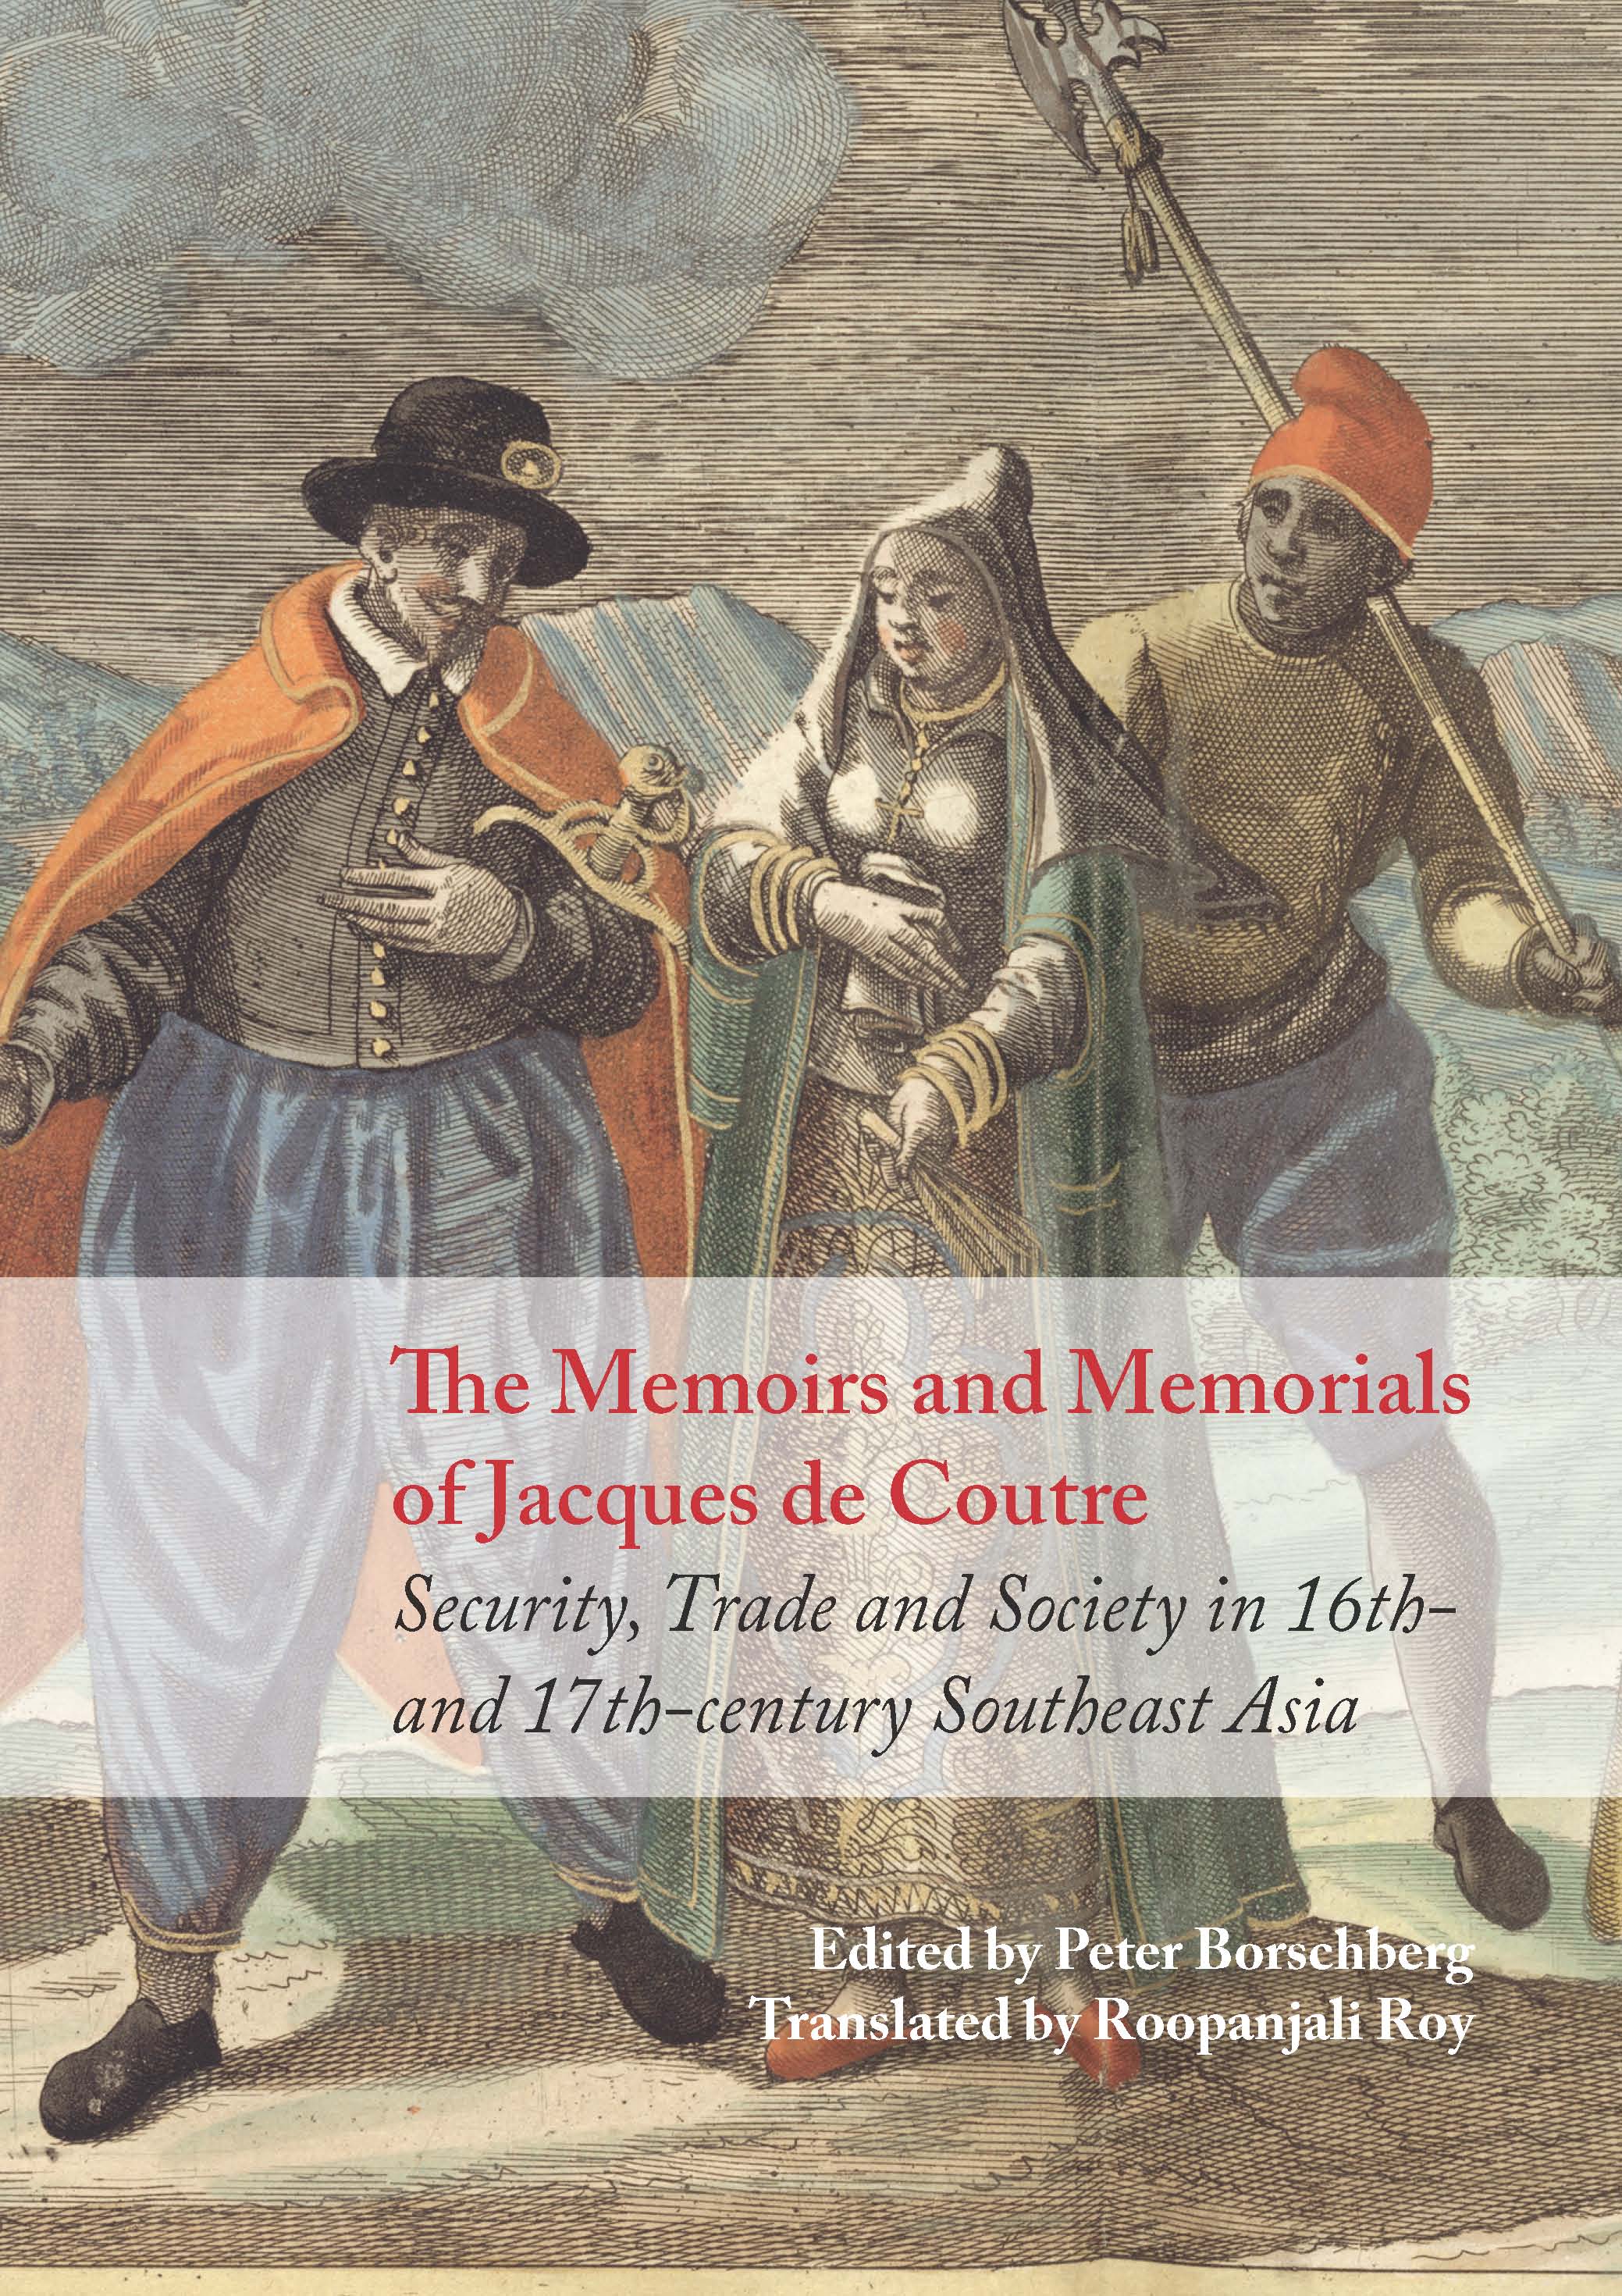 The Memoirs and Memorials of Jacques de Coutre